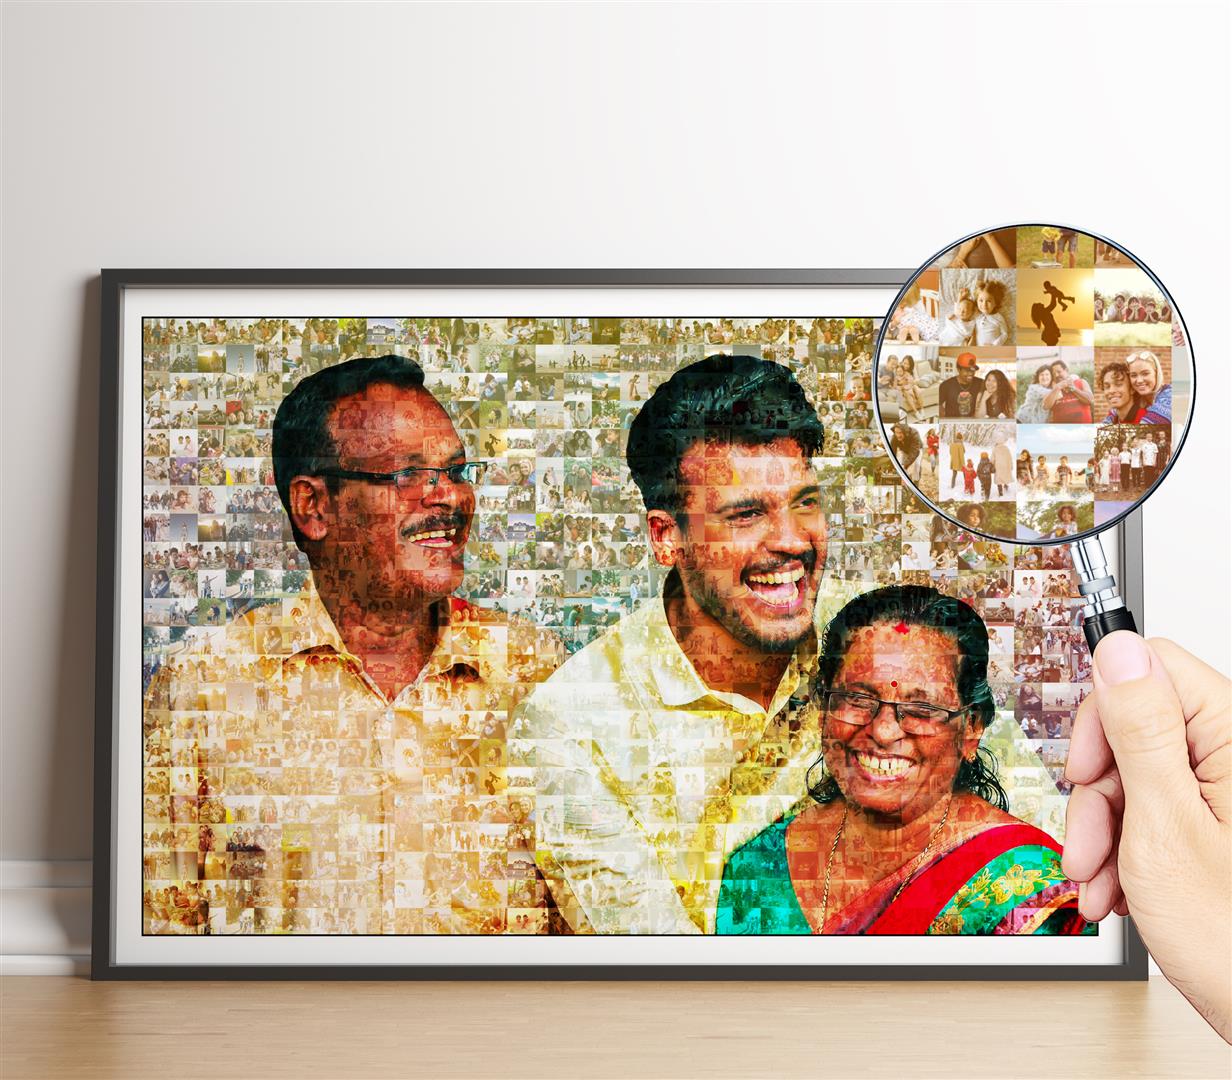 Christmas gifts for mum: Personalized photo frame mosaic for a unique and heartfelt present